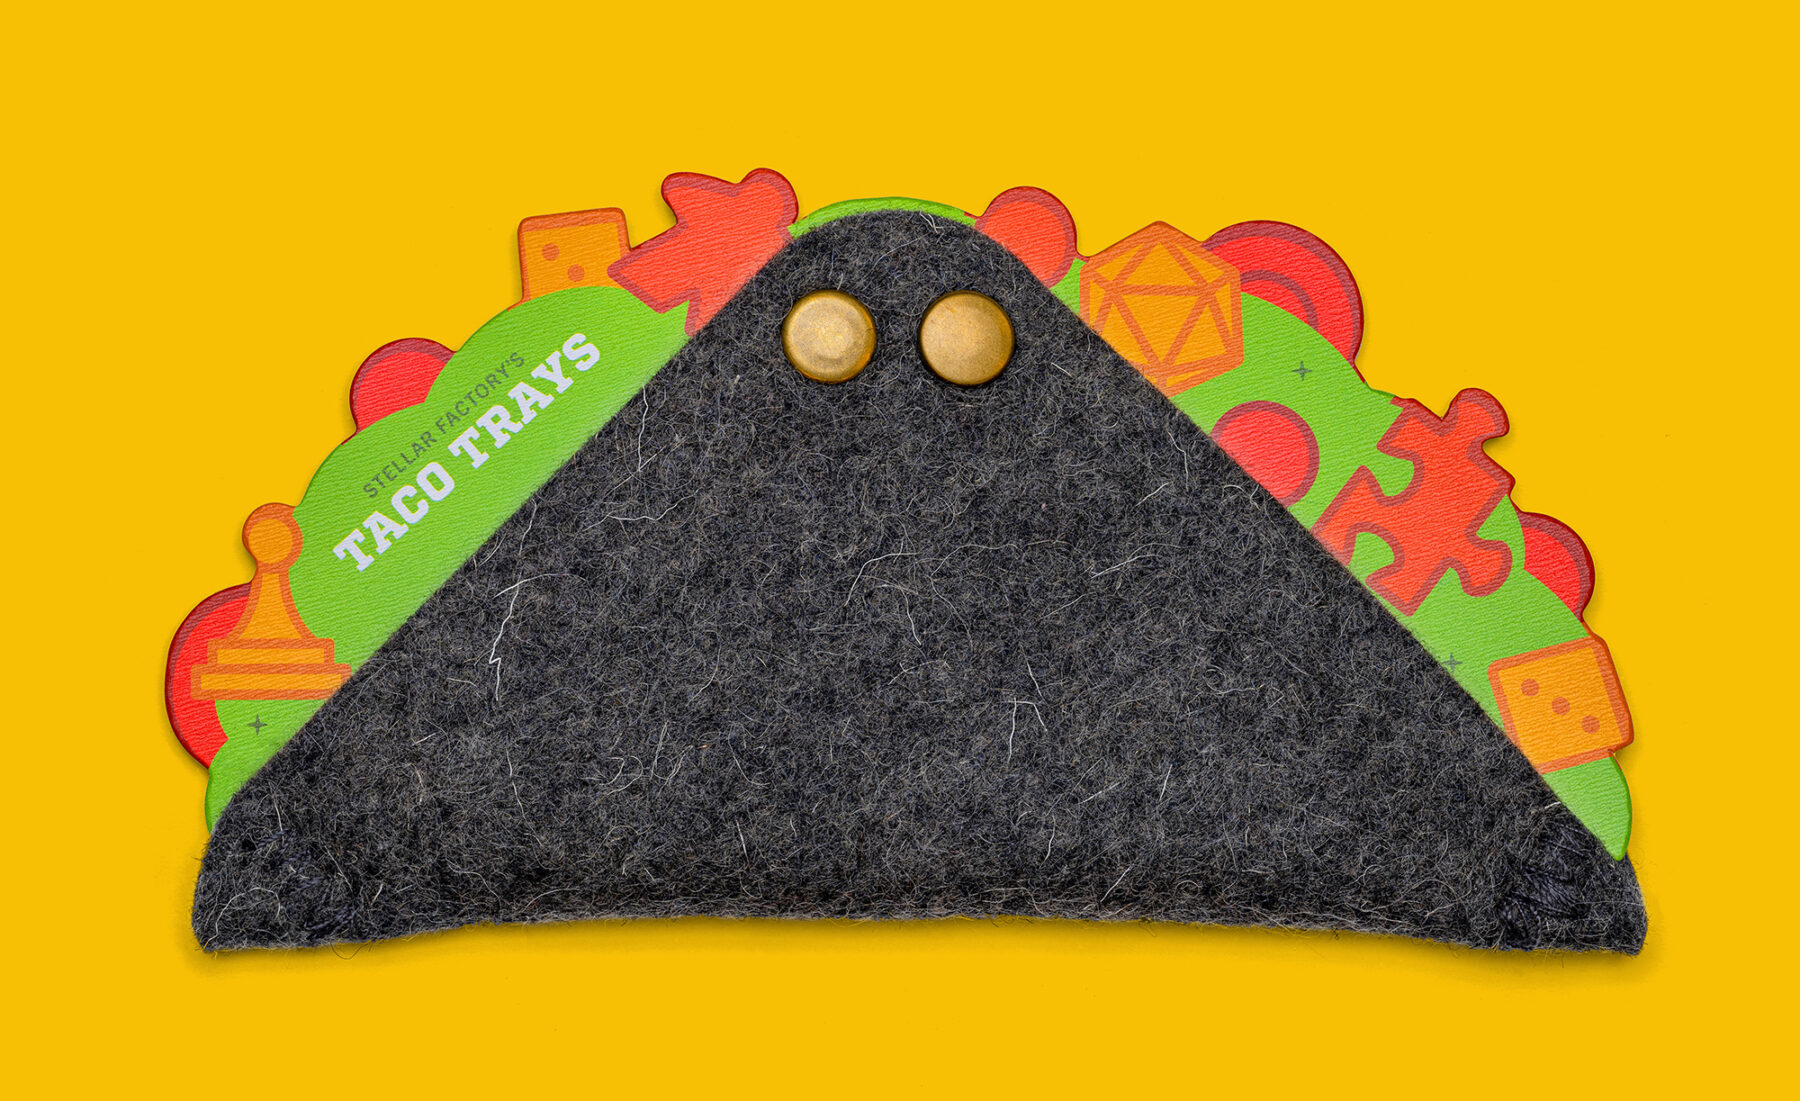 The front side of the taco tray product and packaging featuring colorful game pieces arranged on a taco shell.